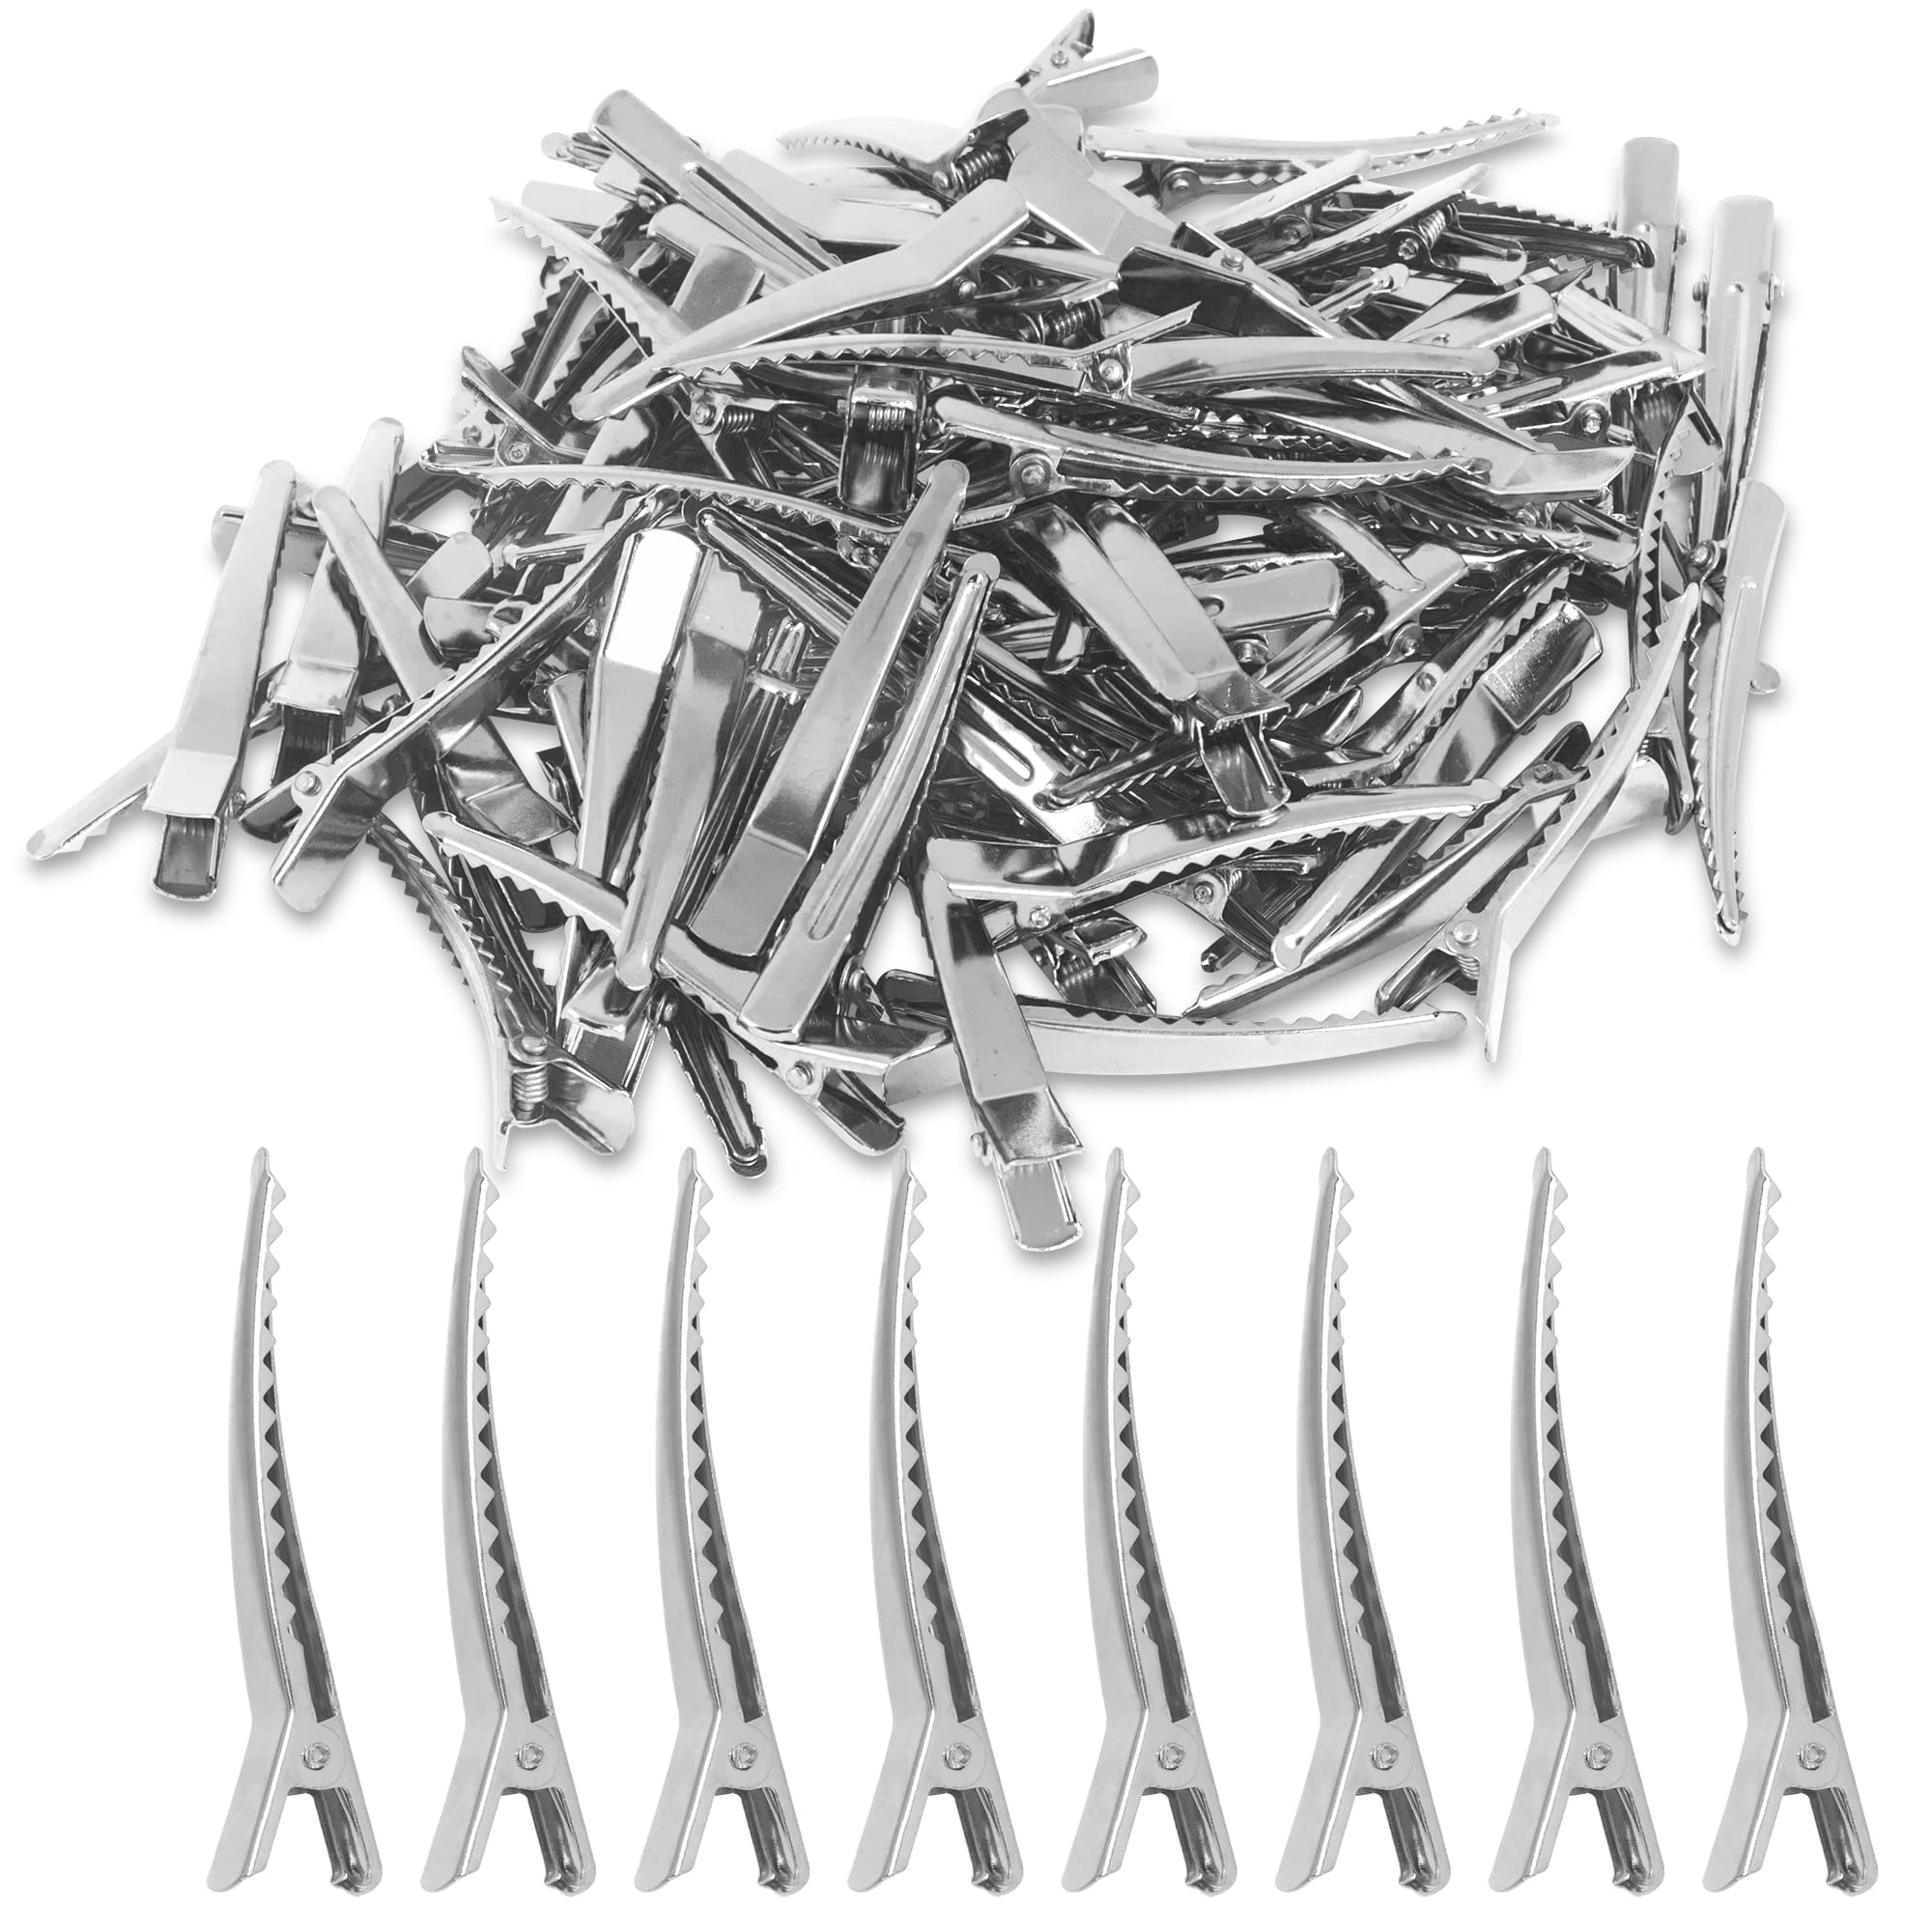 6cm Silver Alligator Teeth Prongs Clips Holders for Hair Care Arts & Crafts  Projects Dry Hanging Clothing Office Paper Document Organization (100  Pieces)